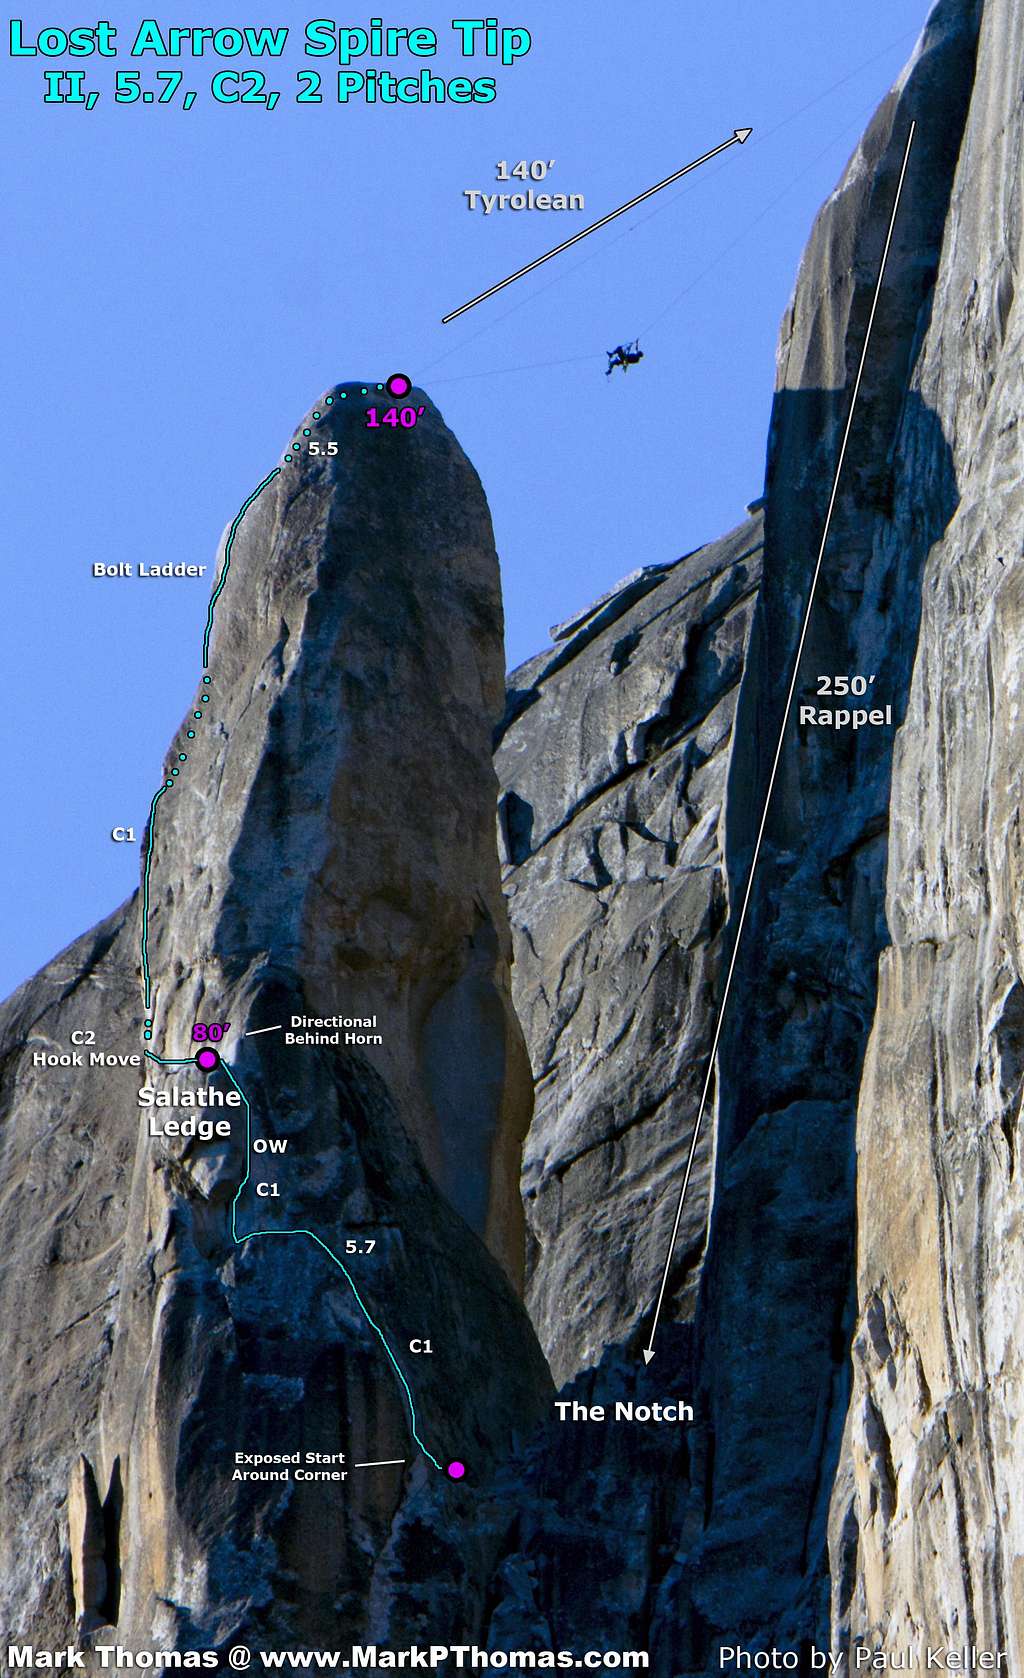 Lost Arrow Spire Tip Route Annotation Full